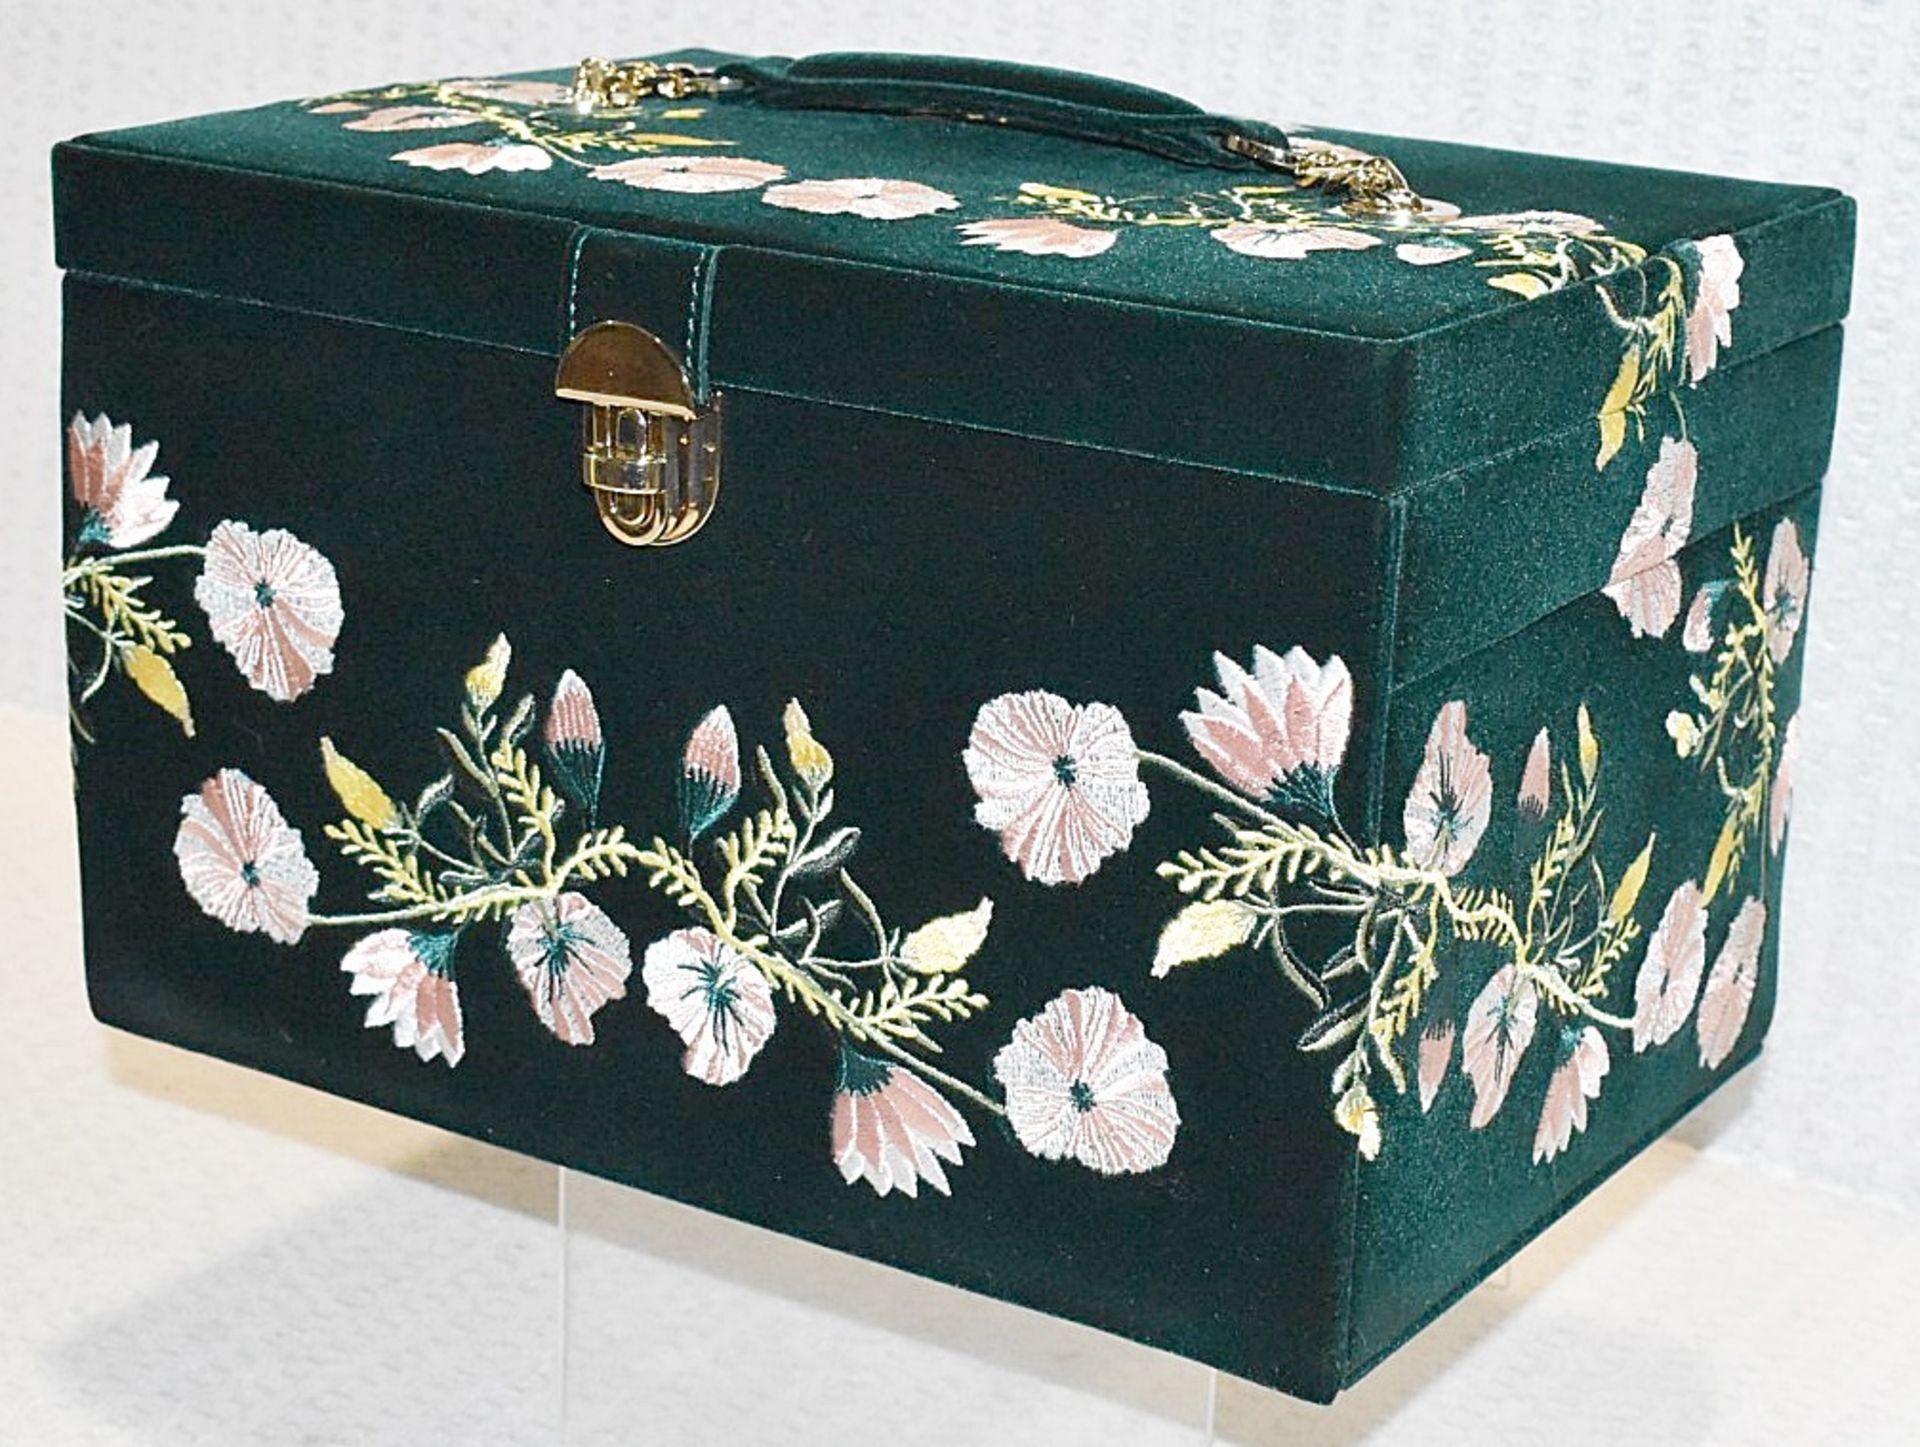 1 x WOLF 'Zoe' Large Luxury Embroidered Jewellery Box, Upholstered in Green Velvet - RRP £739.00 - Image 3 of 10